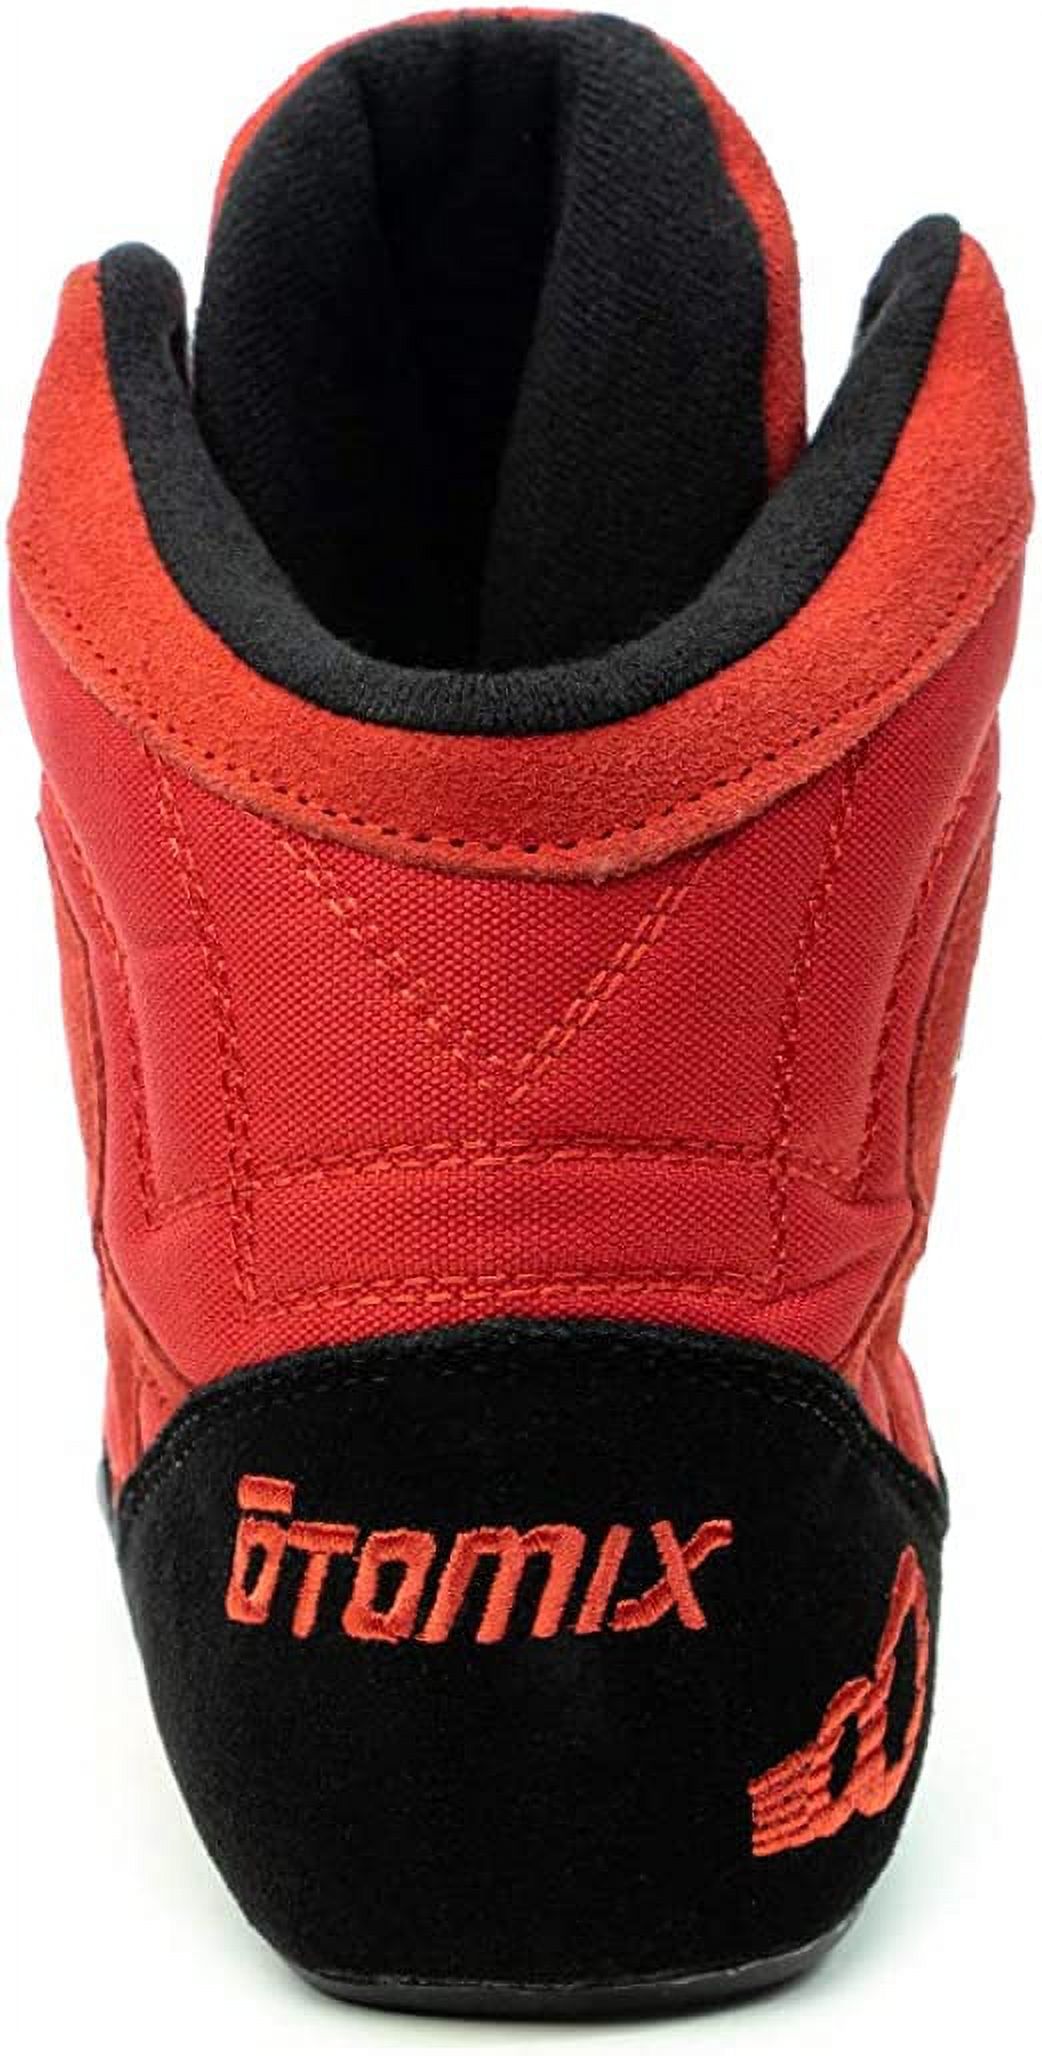 Otomix Red Stingray Escape Weightlifting & Grappling Shoe (Size 7.5) - image 2 of 5